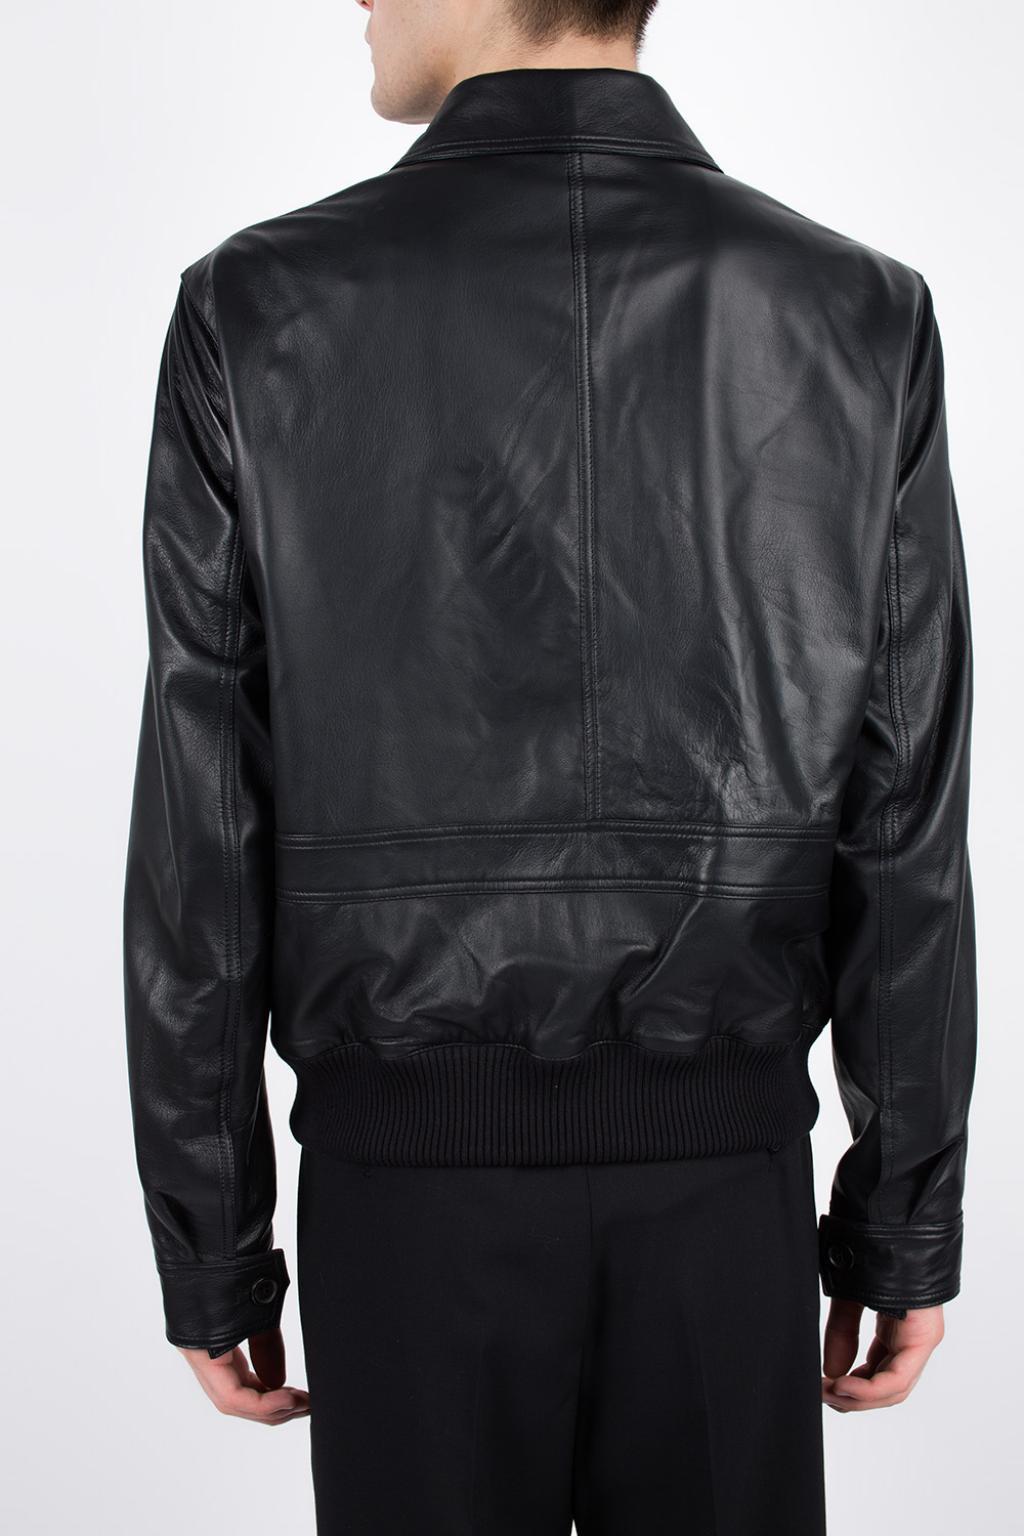 AMI Leather Jacket in Black for Men - Lyst